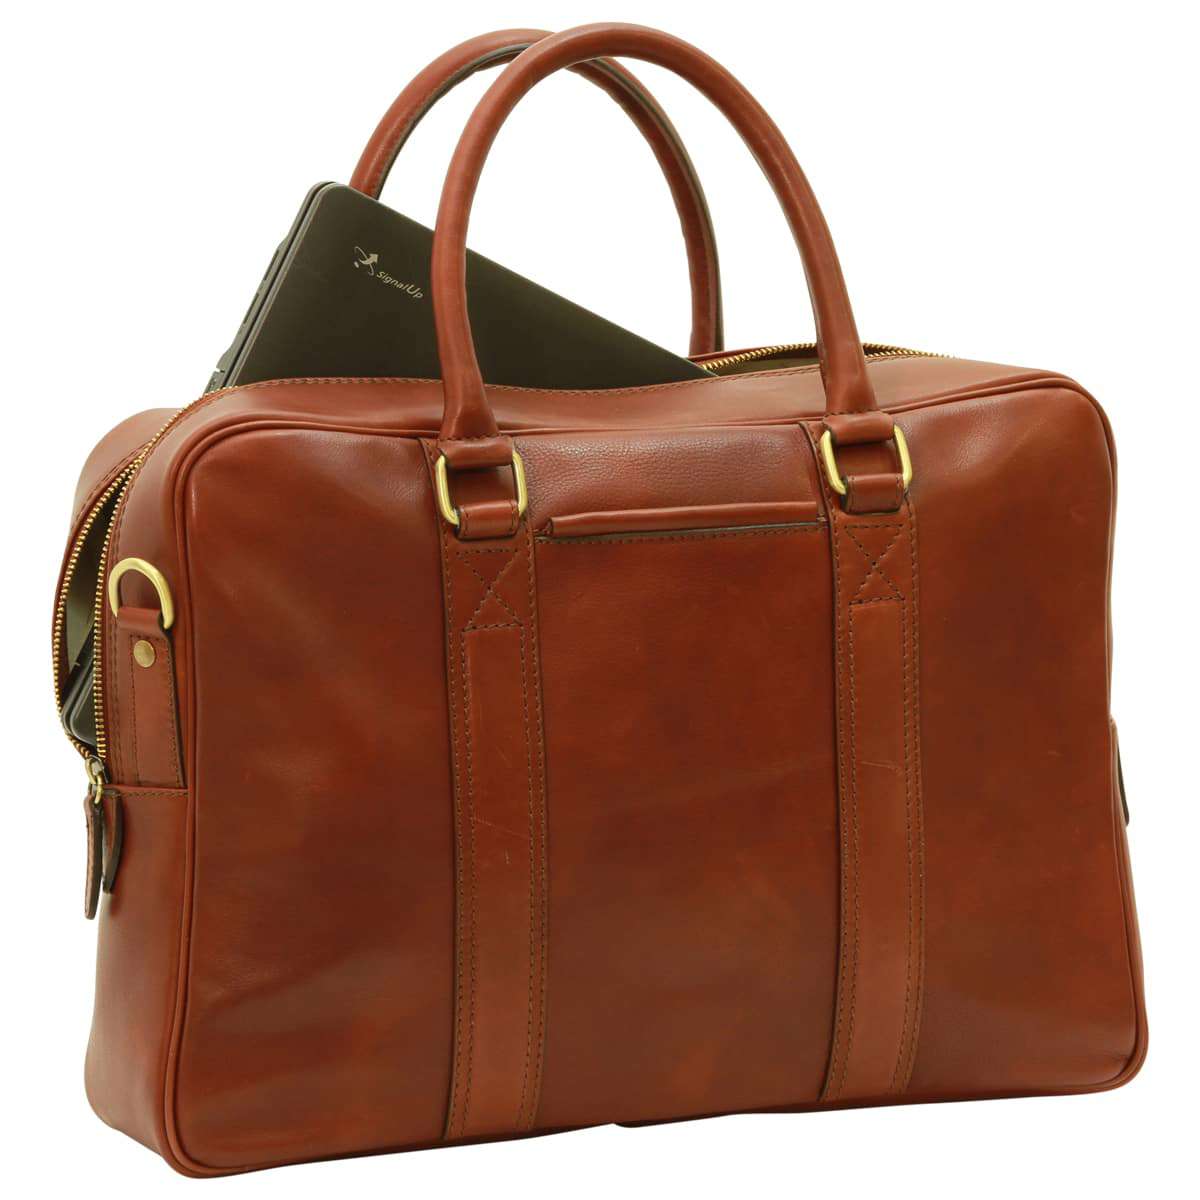 Soft Calfskin Leather Briefcase - Brown | 030191MA | EURO | Old Angler Firenze